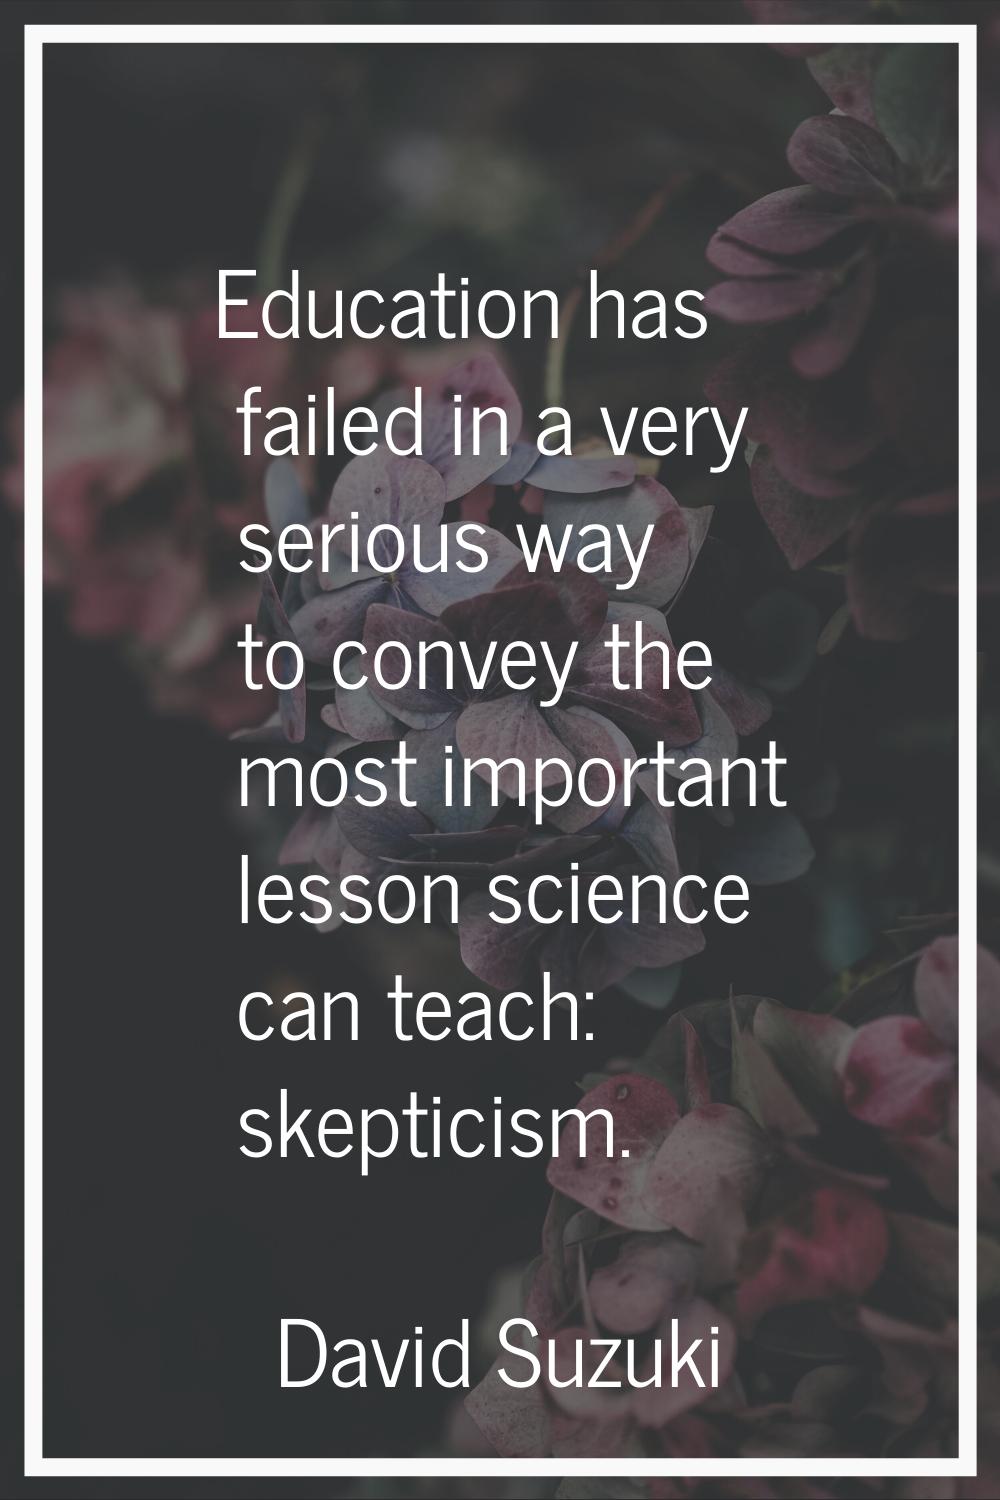 Education has failed in a very serious way to convey the most important lesson science can teach: s